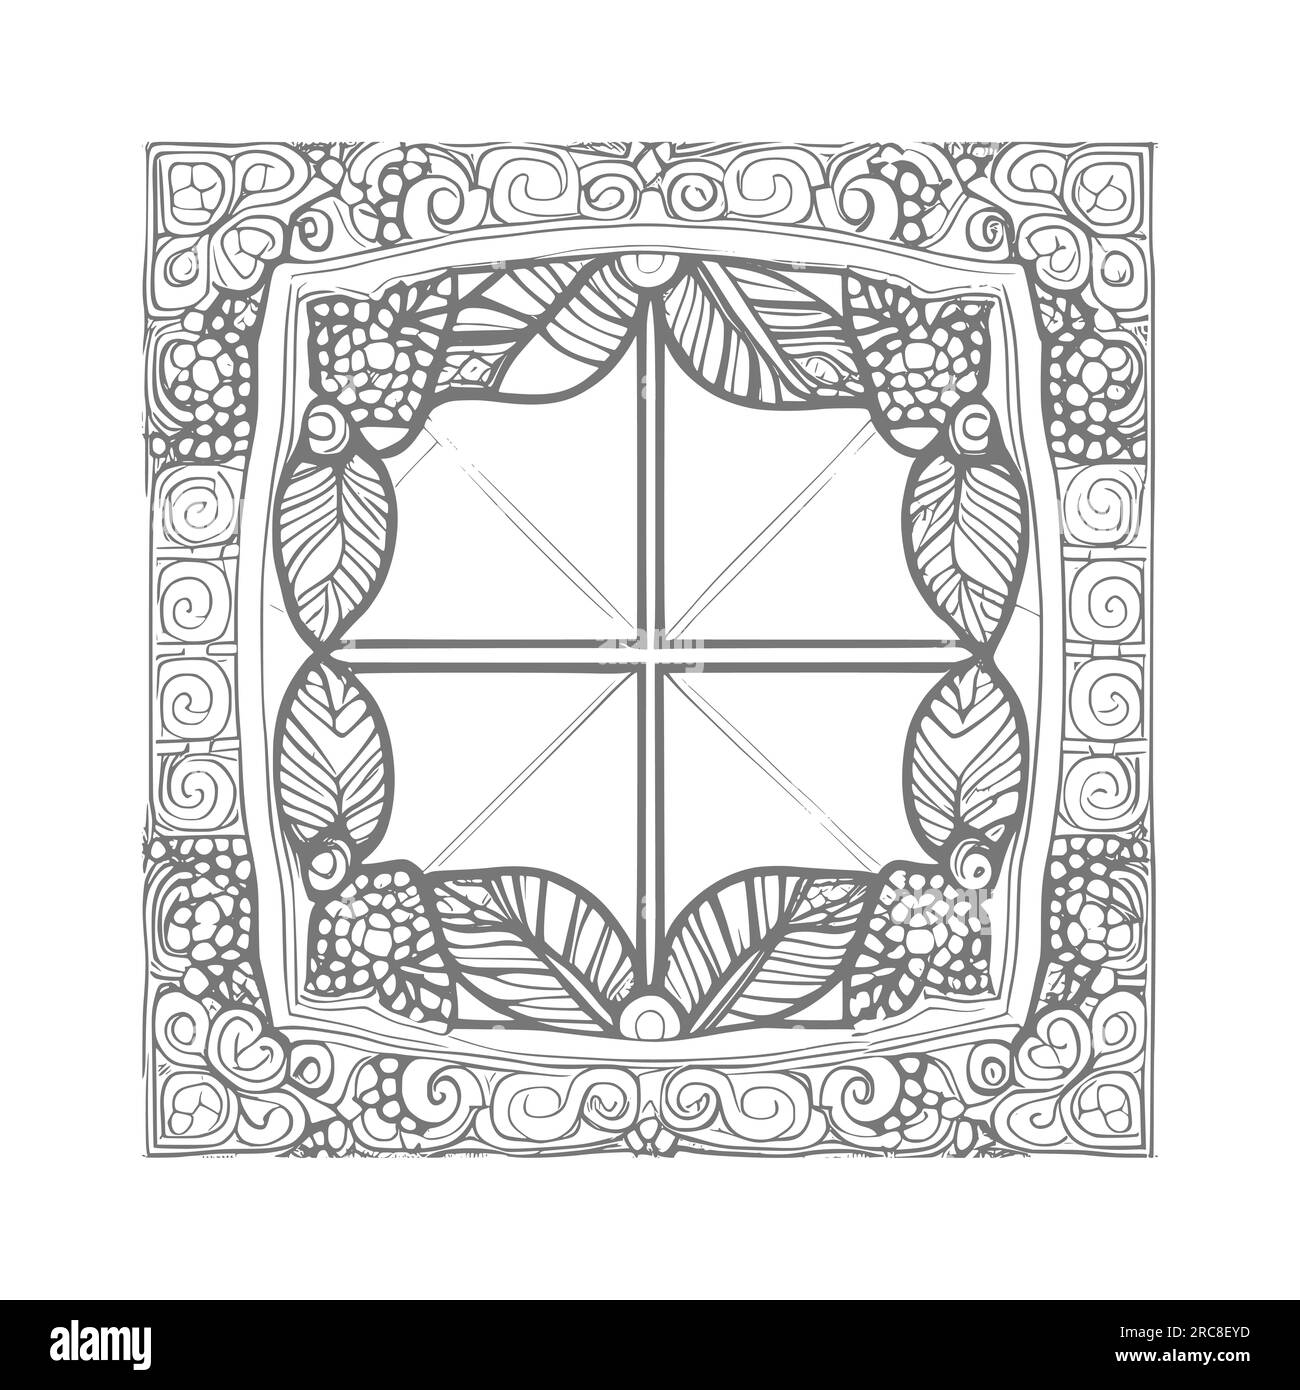 Flowers Coloring Pages for Adults Mandala Red Rose by ROMAN